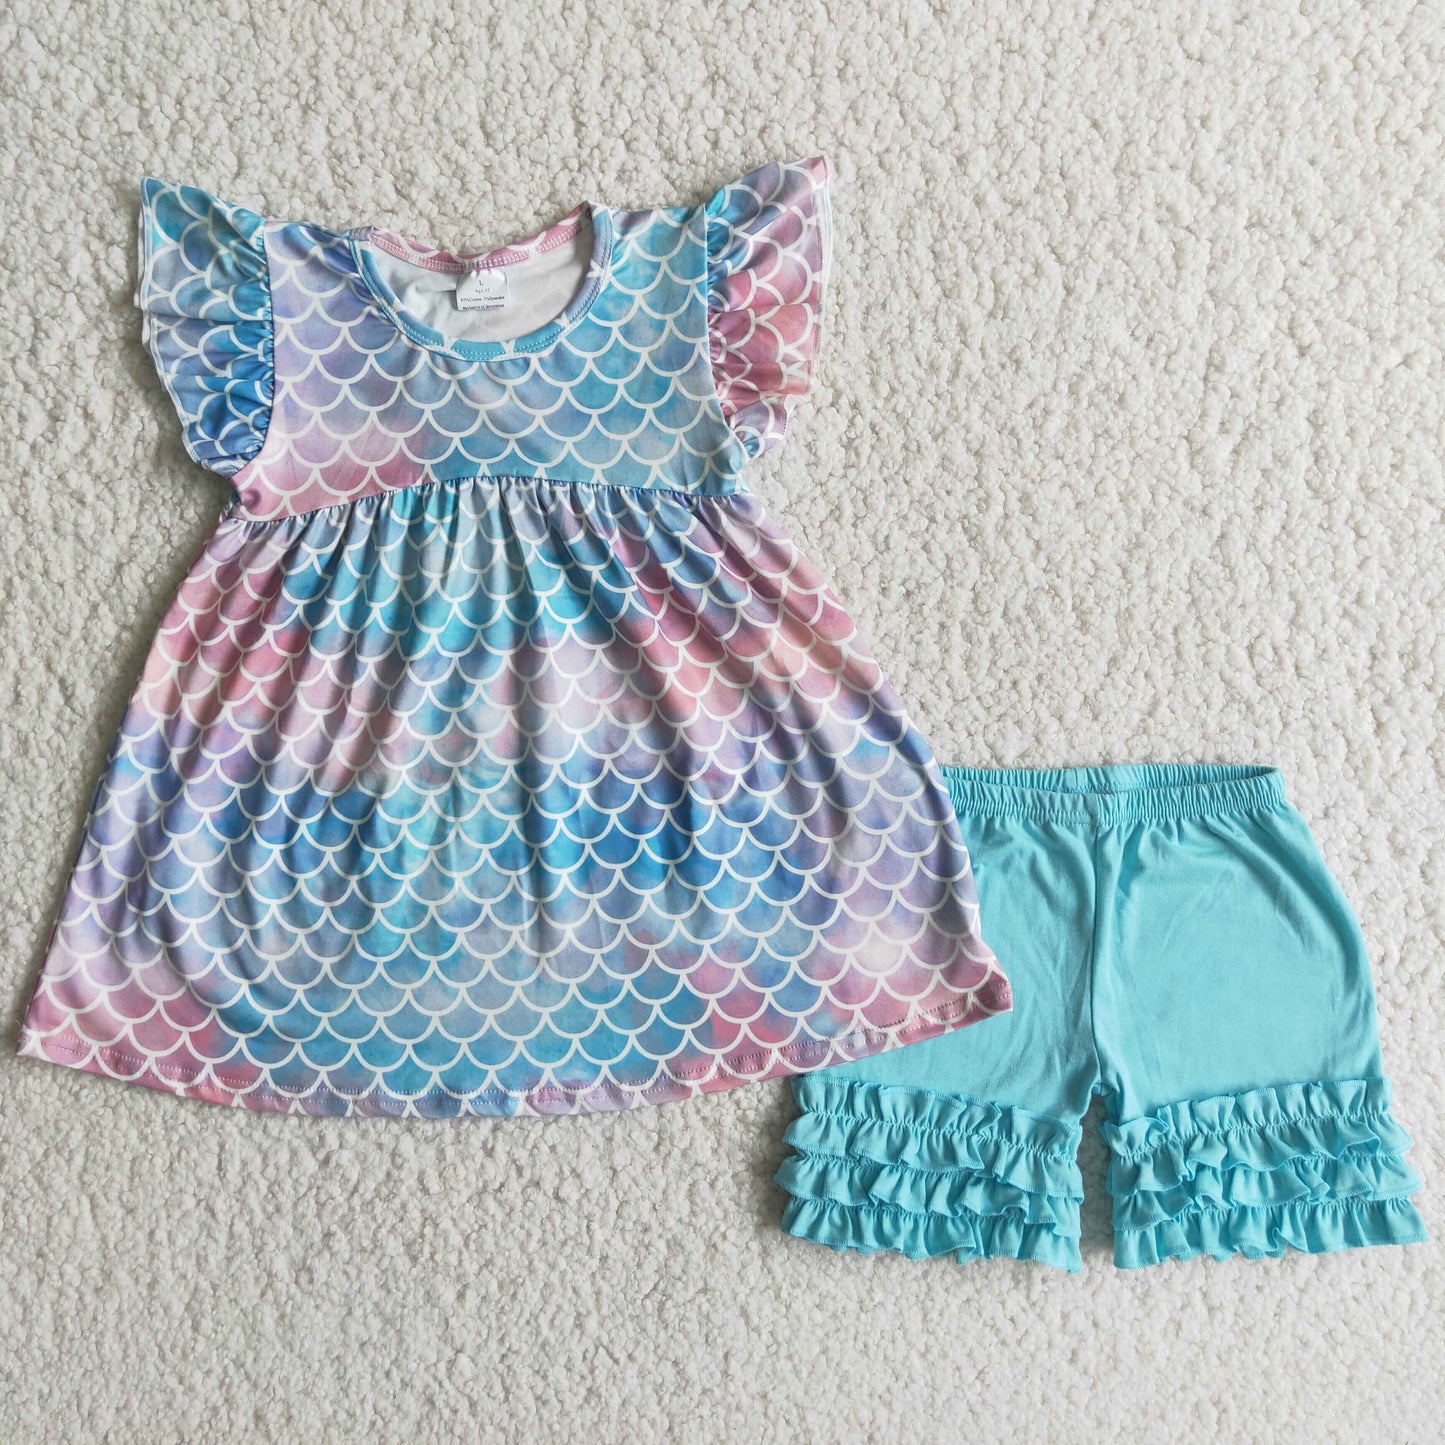 Mermaid scale flutter sleeve shorts outfits